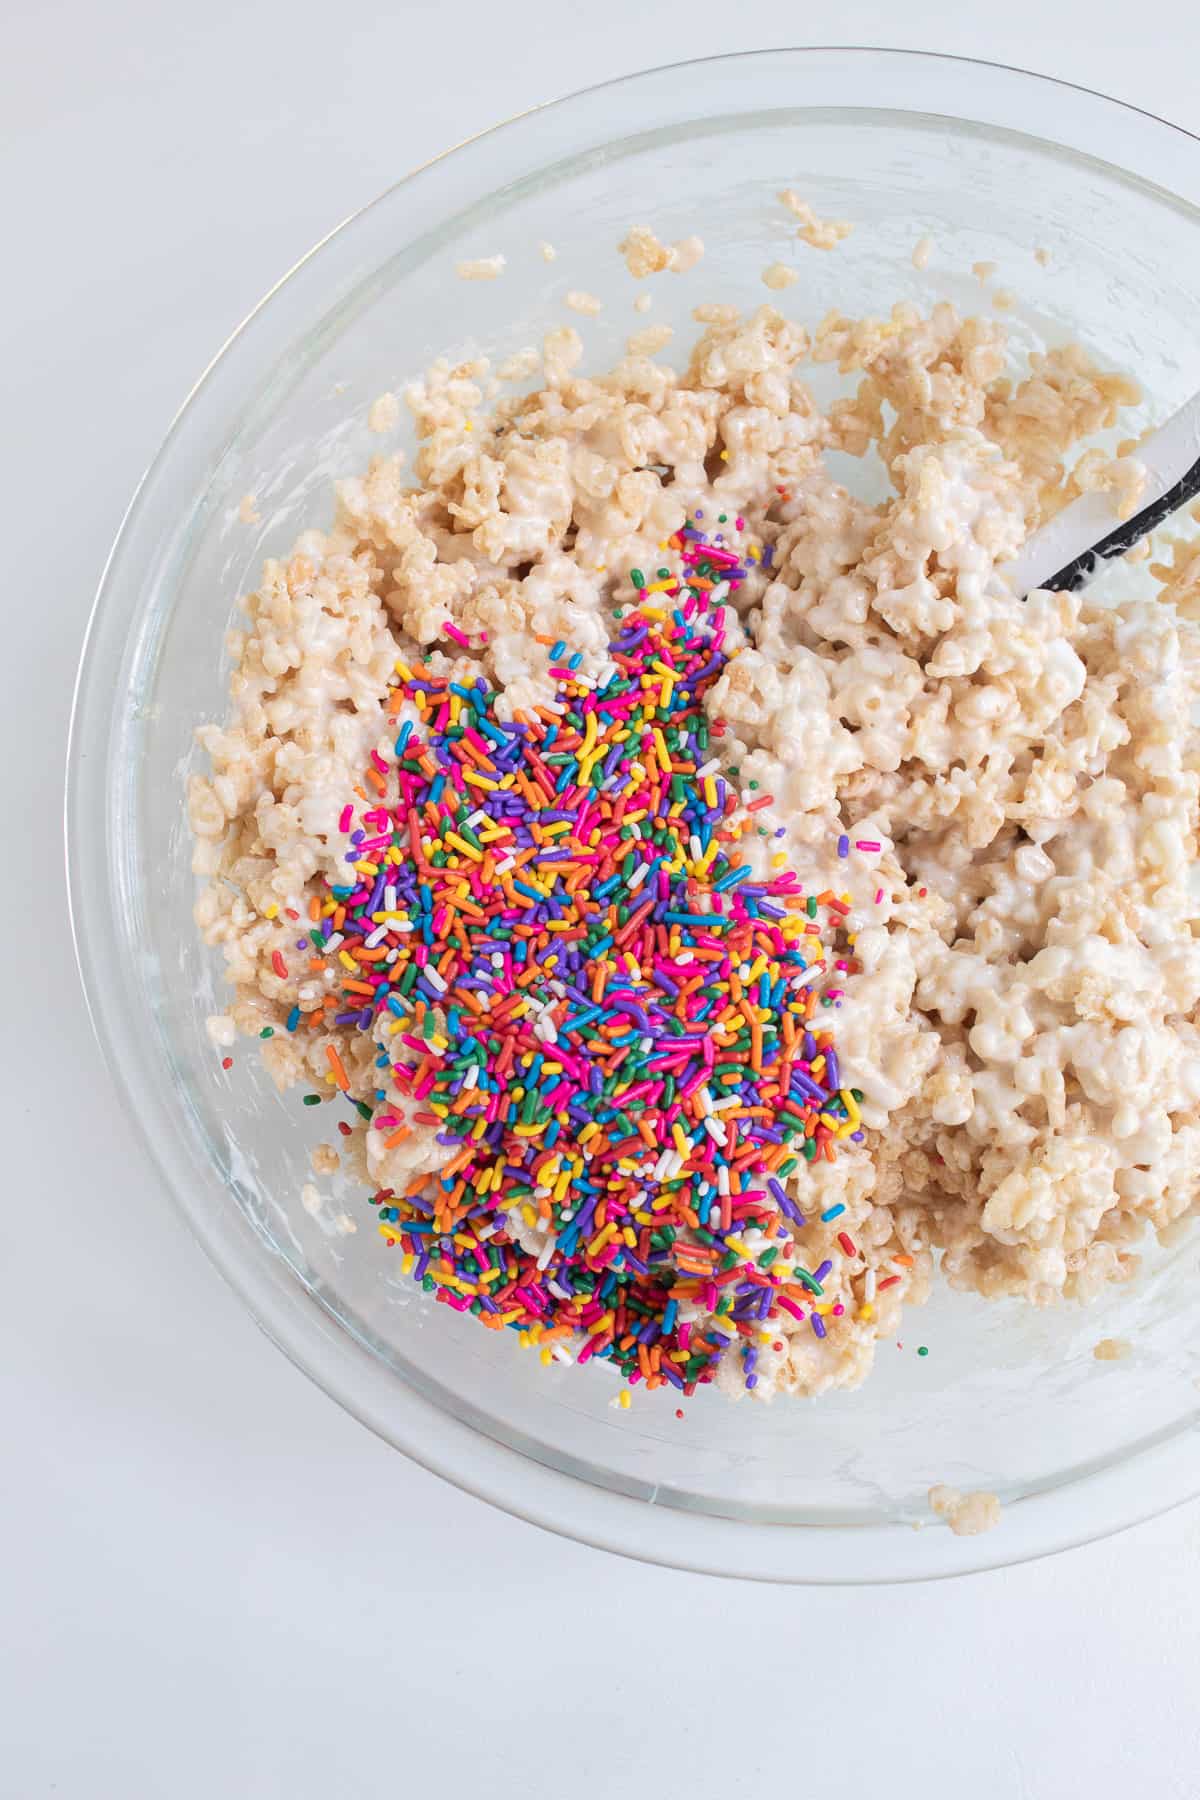 The multicolored sprinkles are poured over the marshmallow and cereal mixture.